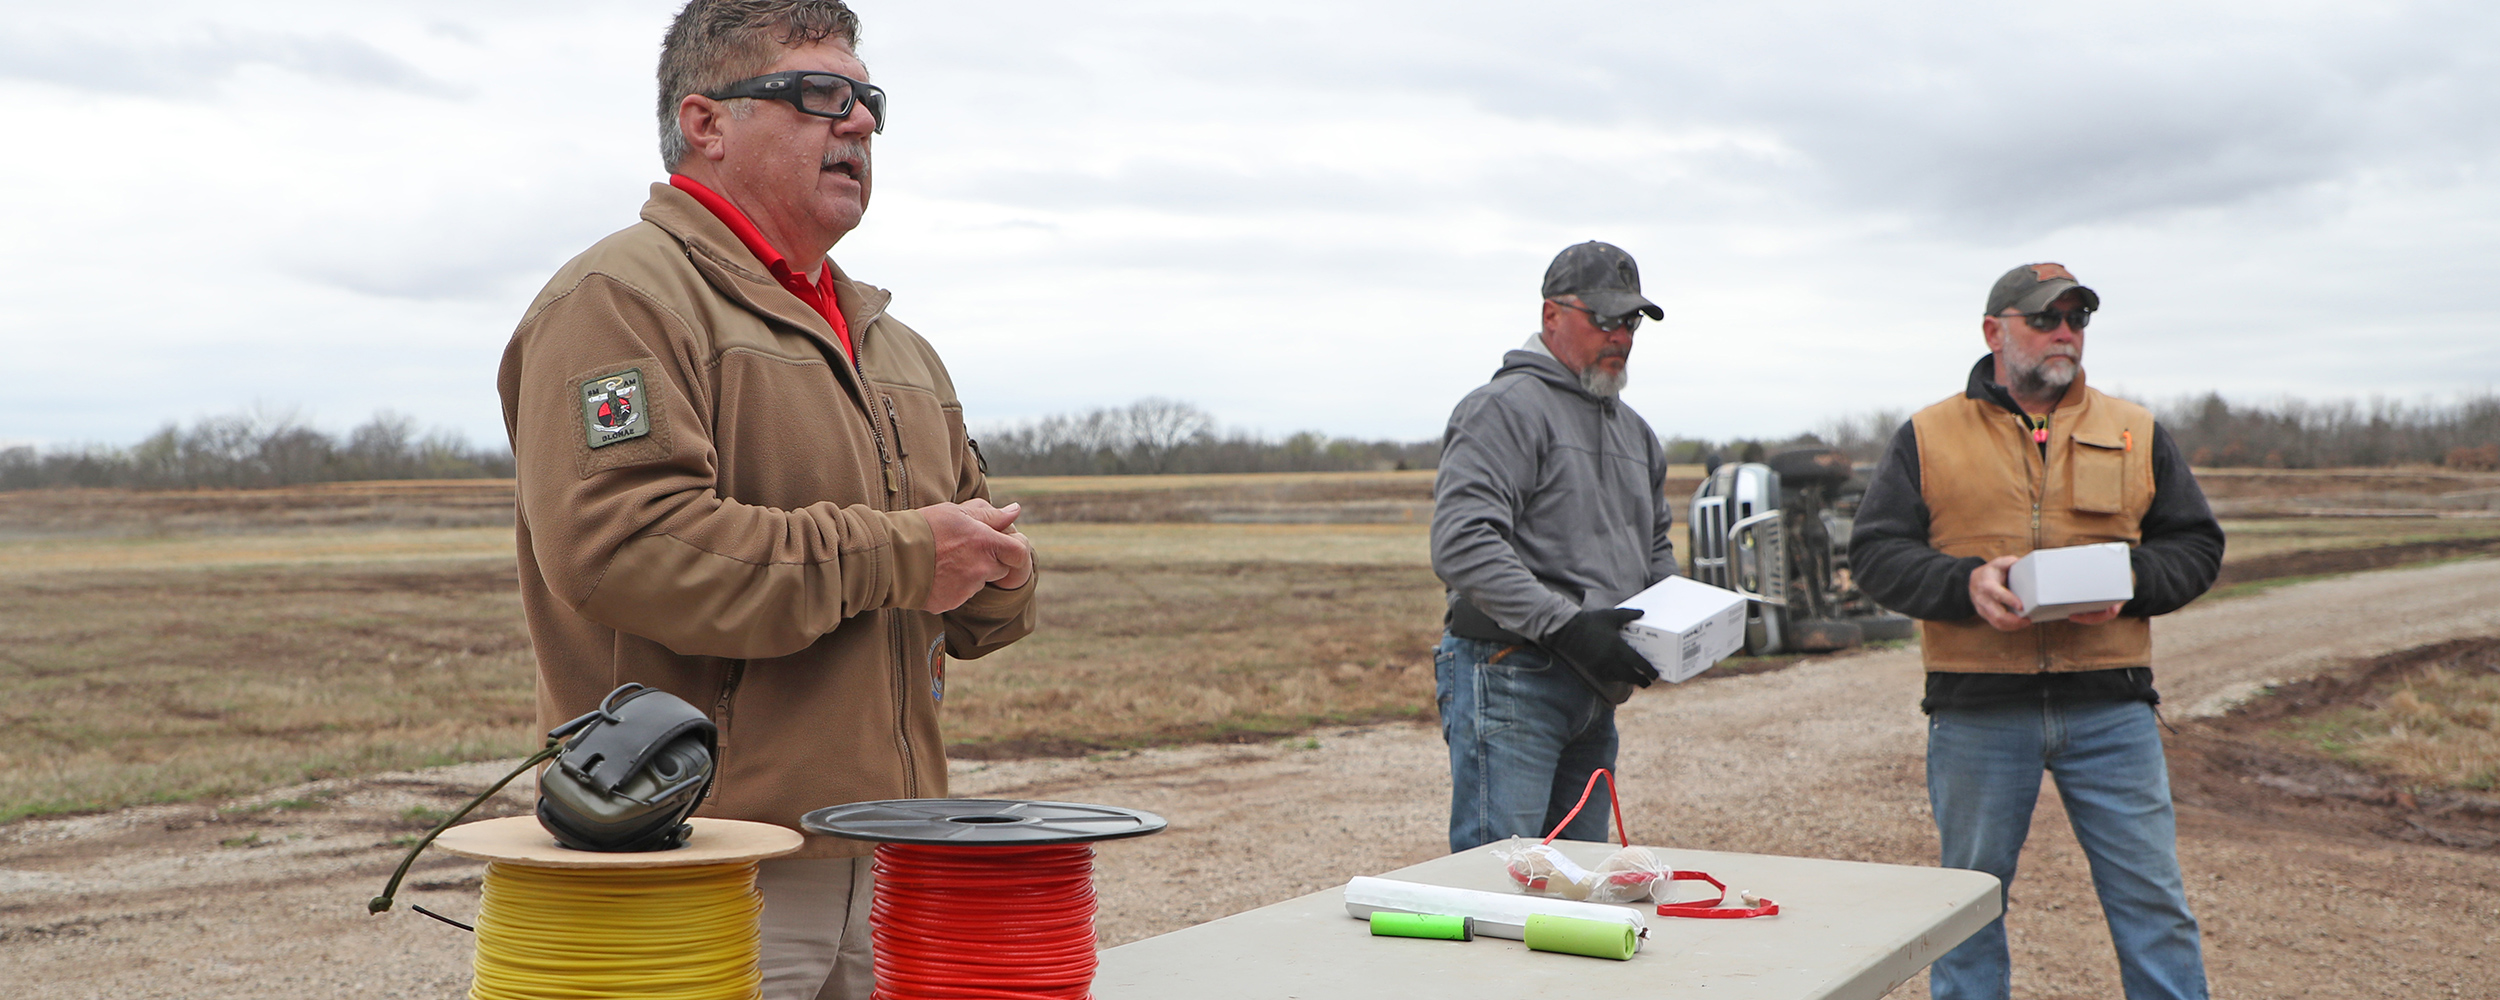 Johnnie Green, a Raven’s Challenge bomb technician instructor, leads a demonstration at the Center for Fire and Explosives, Forensic Investigation, Training and Research in Pawnee, Oklahoma..